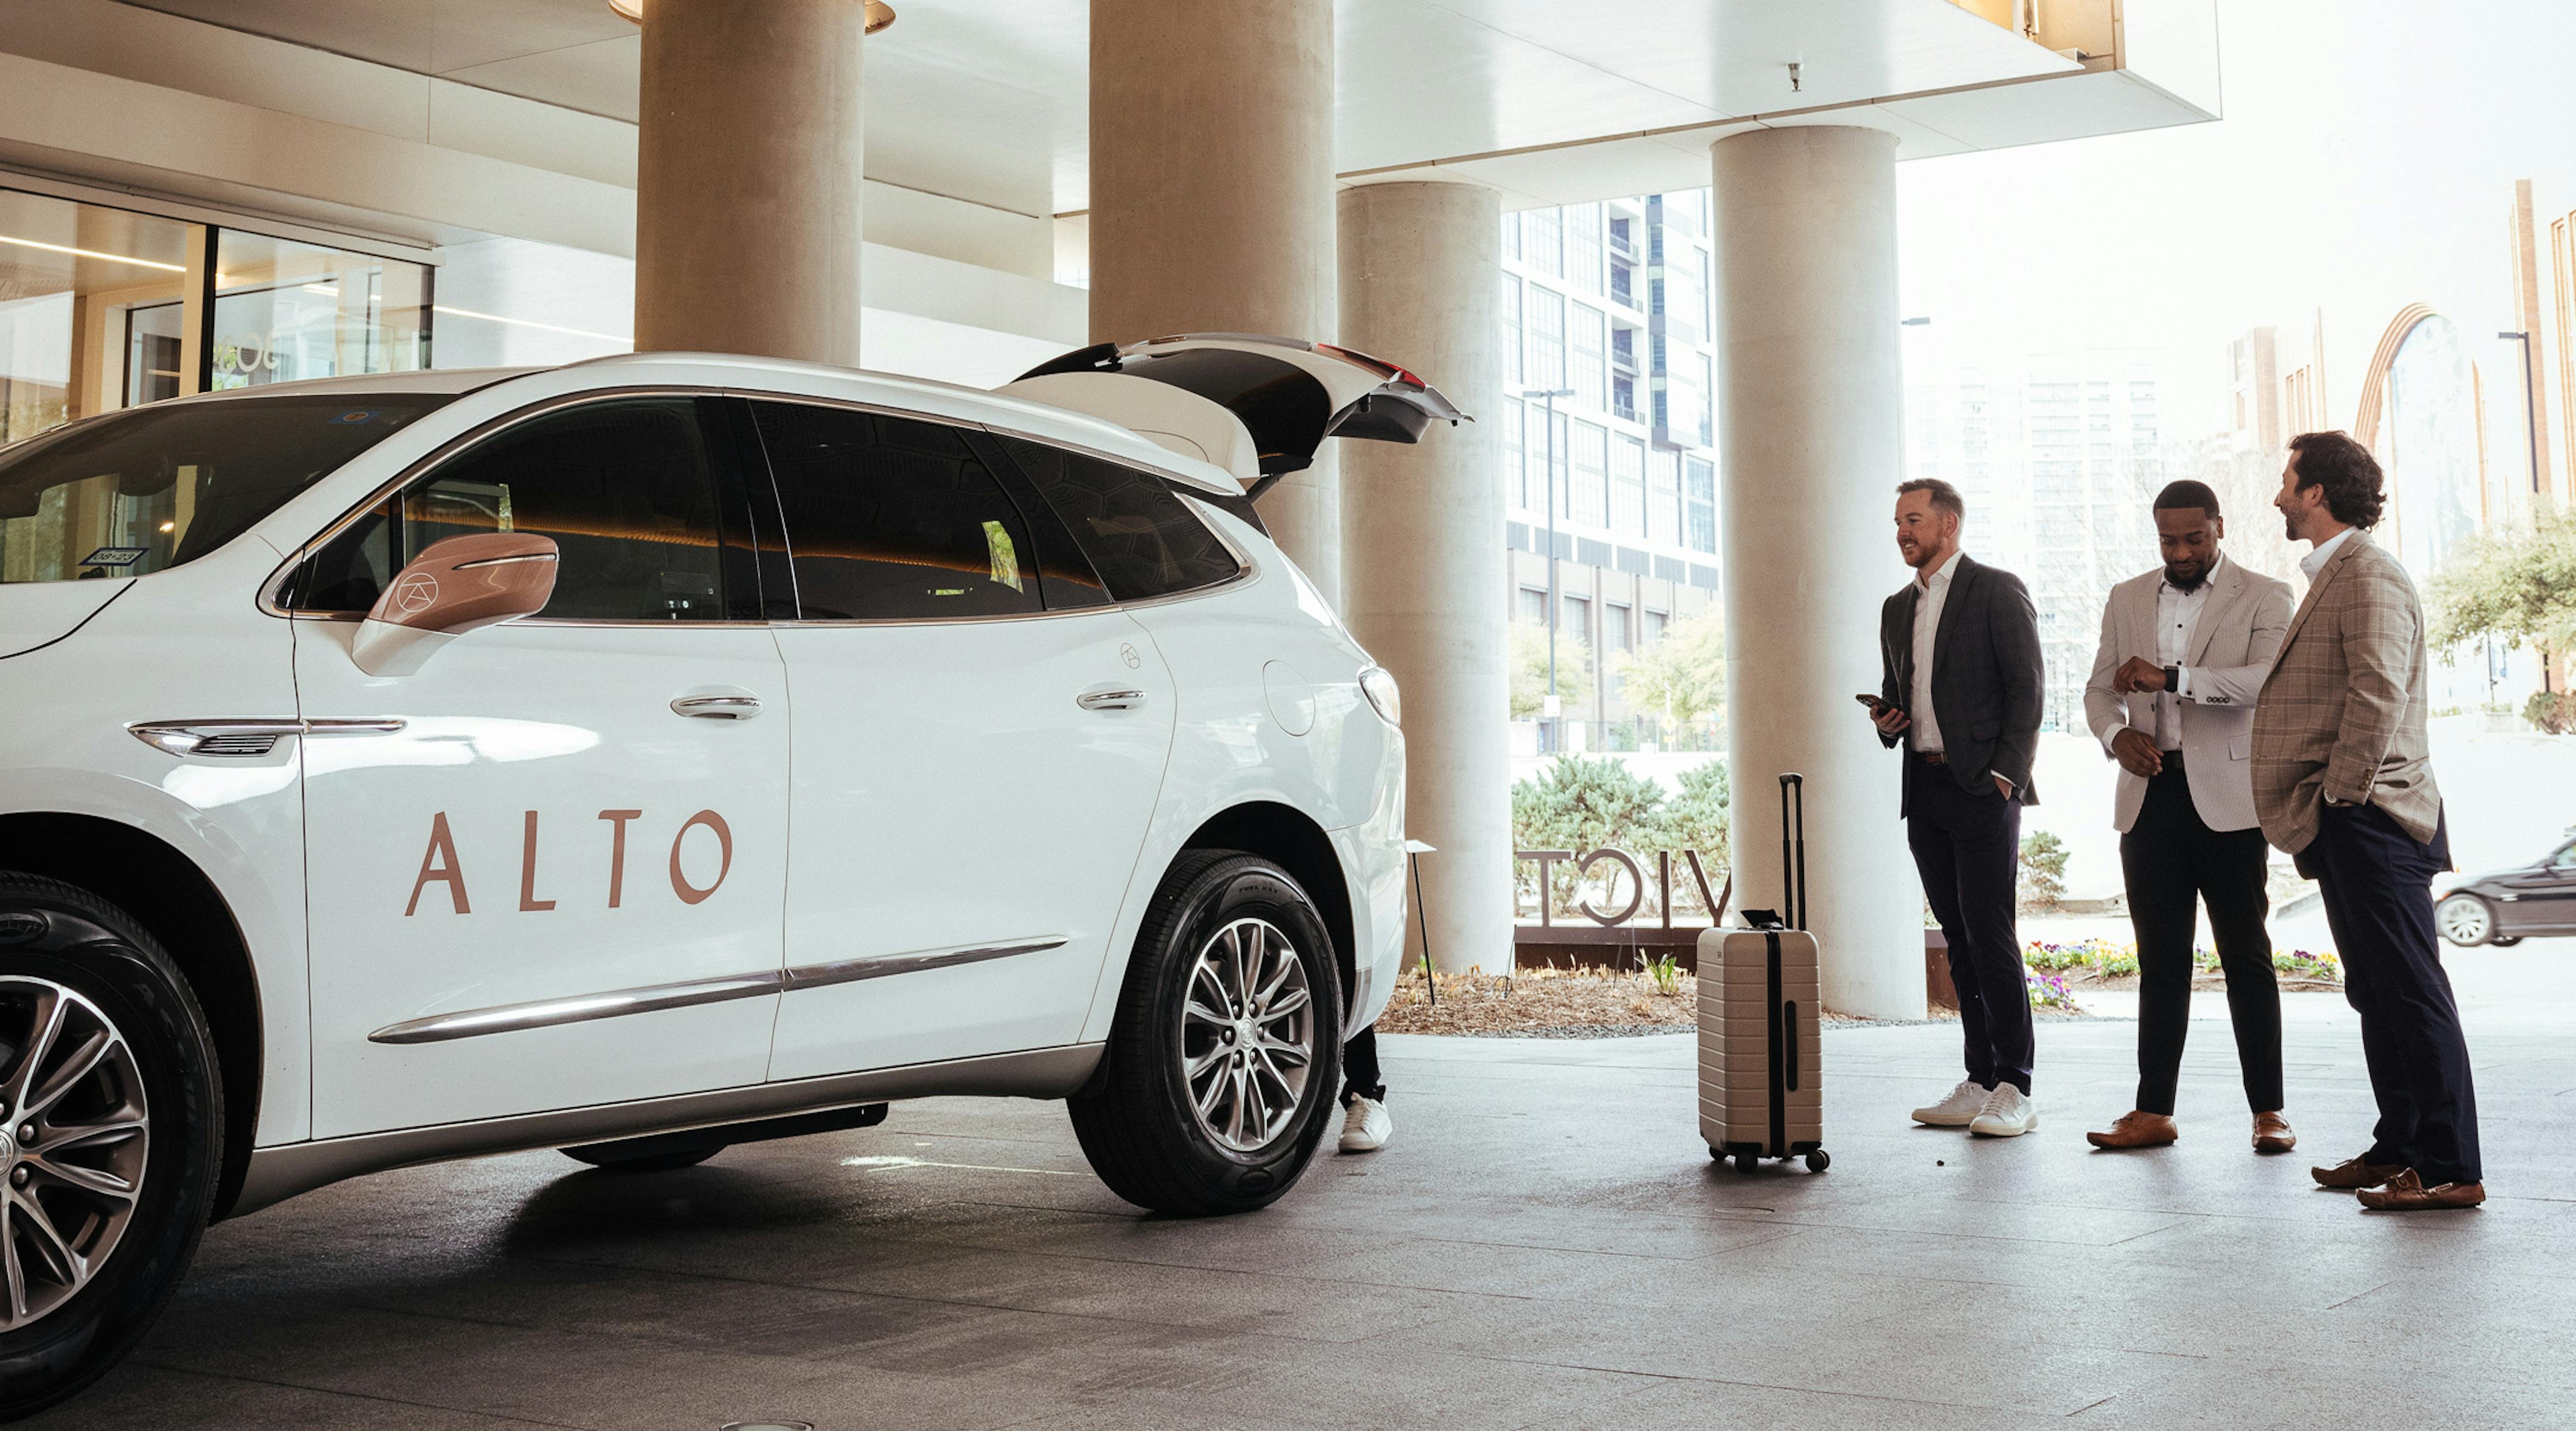 My Number One Rideshare - Alto Arrives In Miami — The Grateful Gardenia